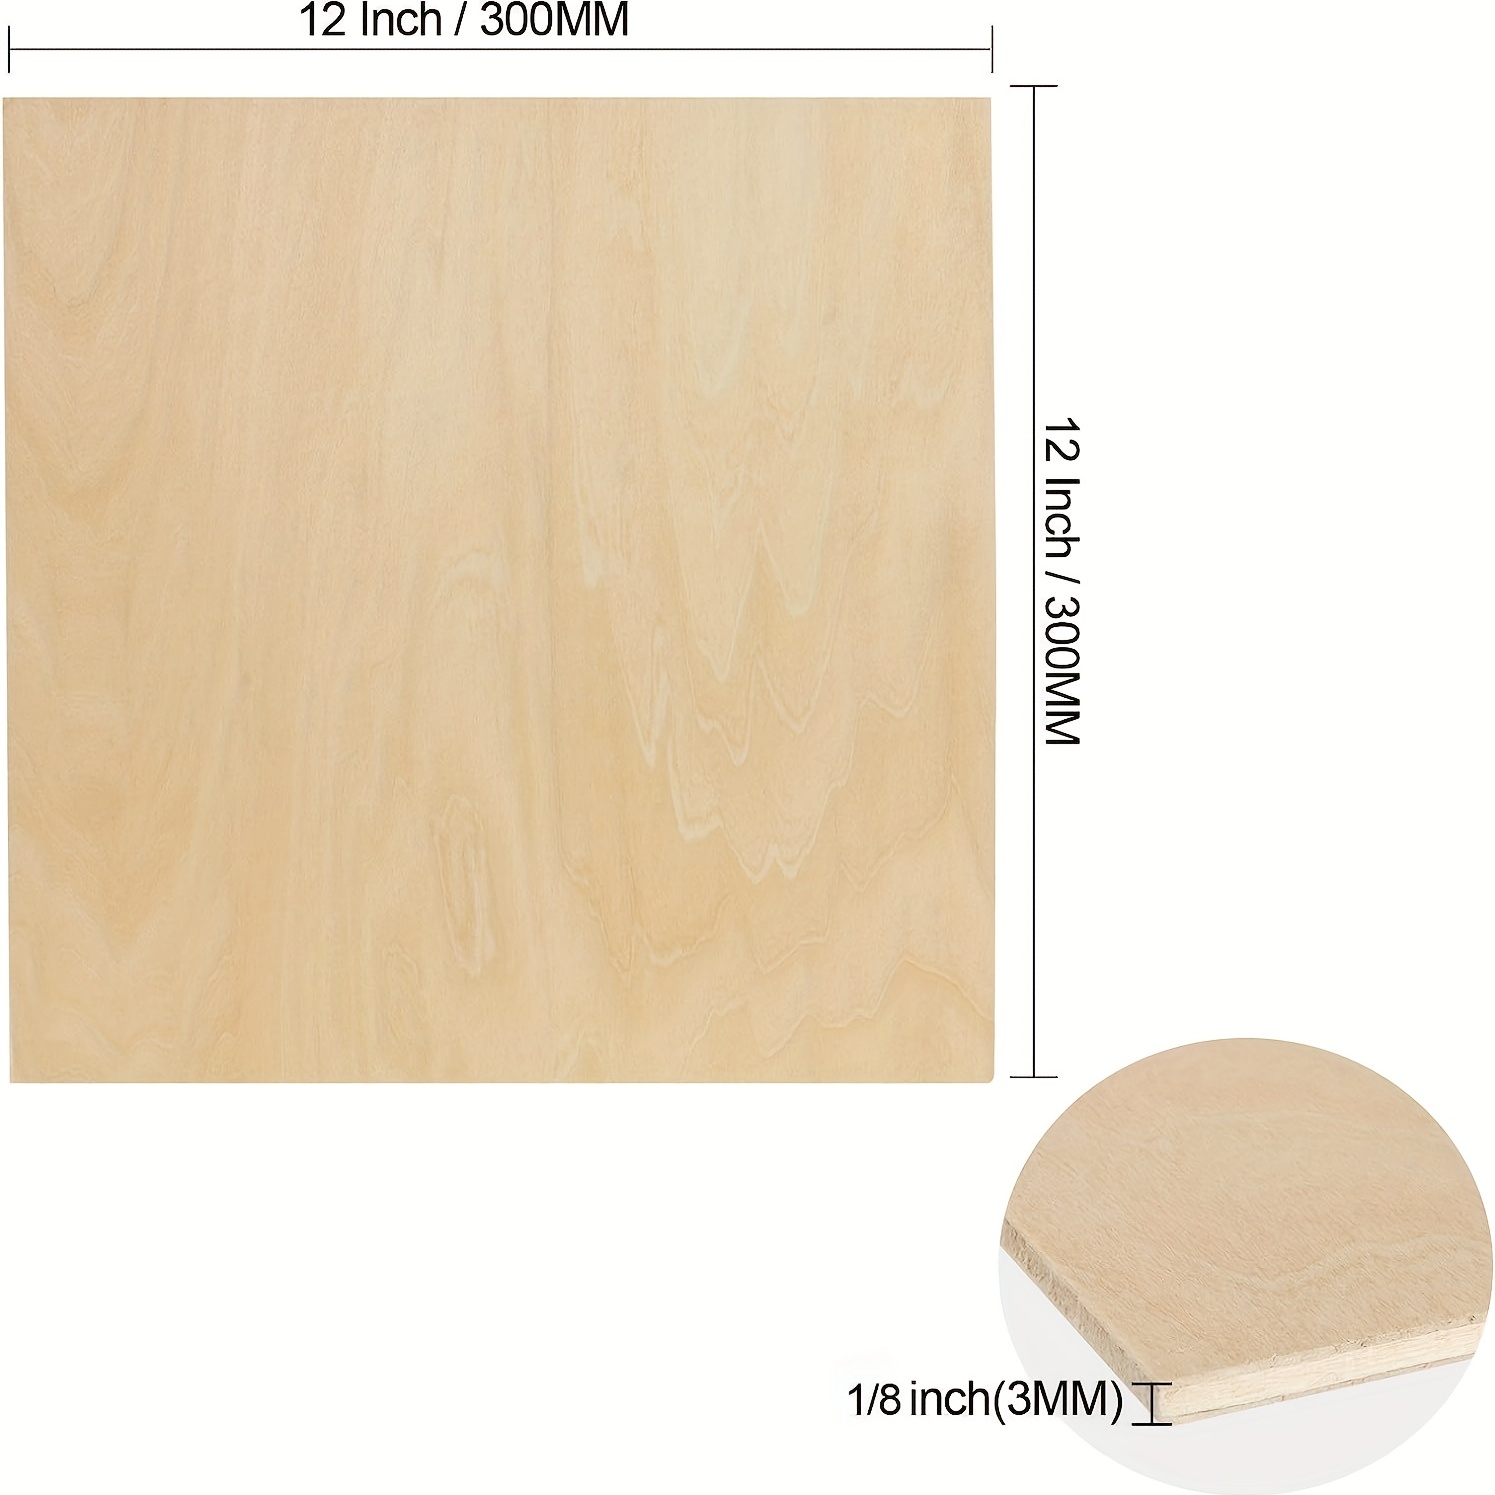 12 Packs 11.8 × 11.8 Inch Basswood Sheets Thin Wood Sheets Plywood Board  Basswood Sheets 1/8 Inch Square Wood Boards For Crafts, DIY Project, Mini Ho